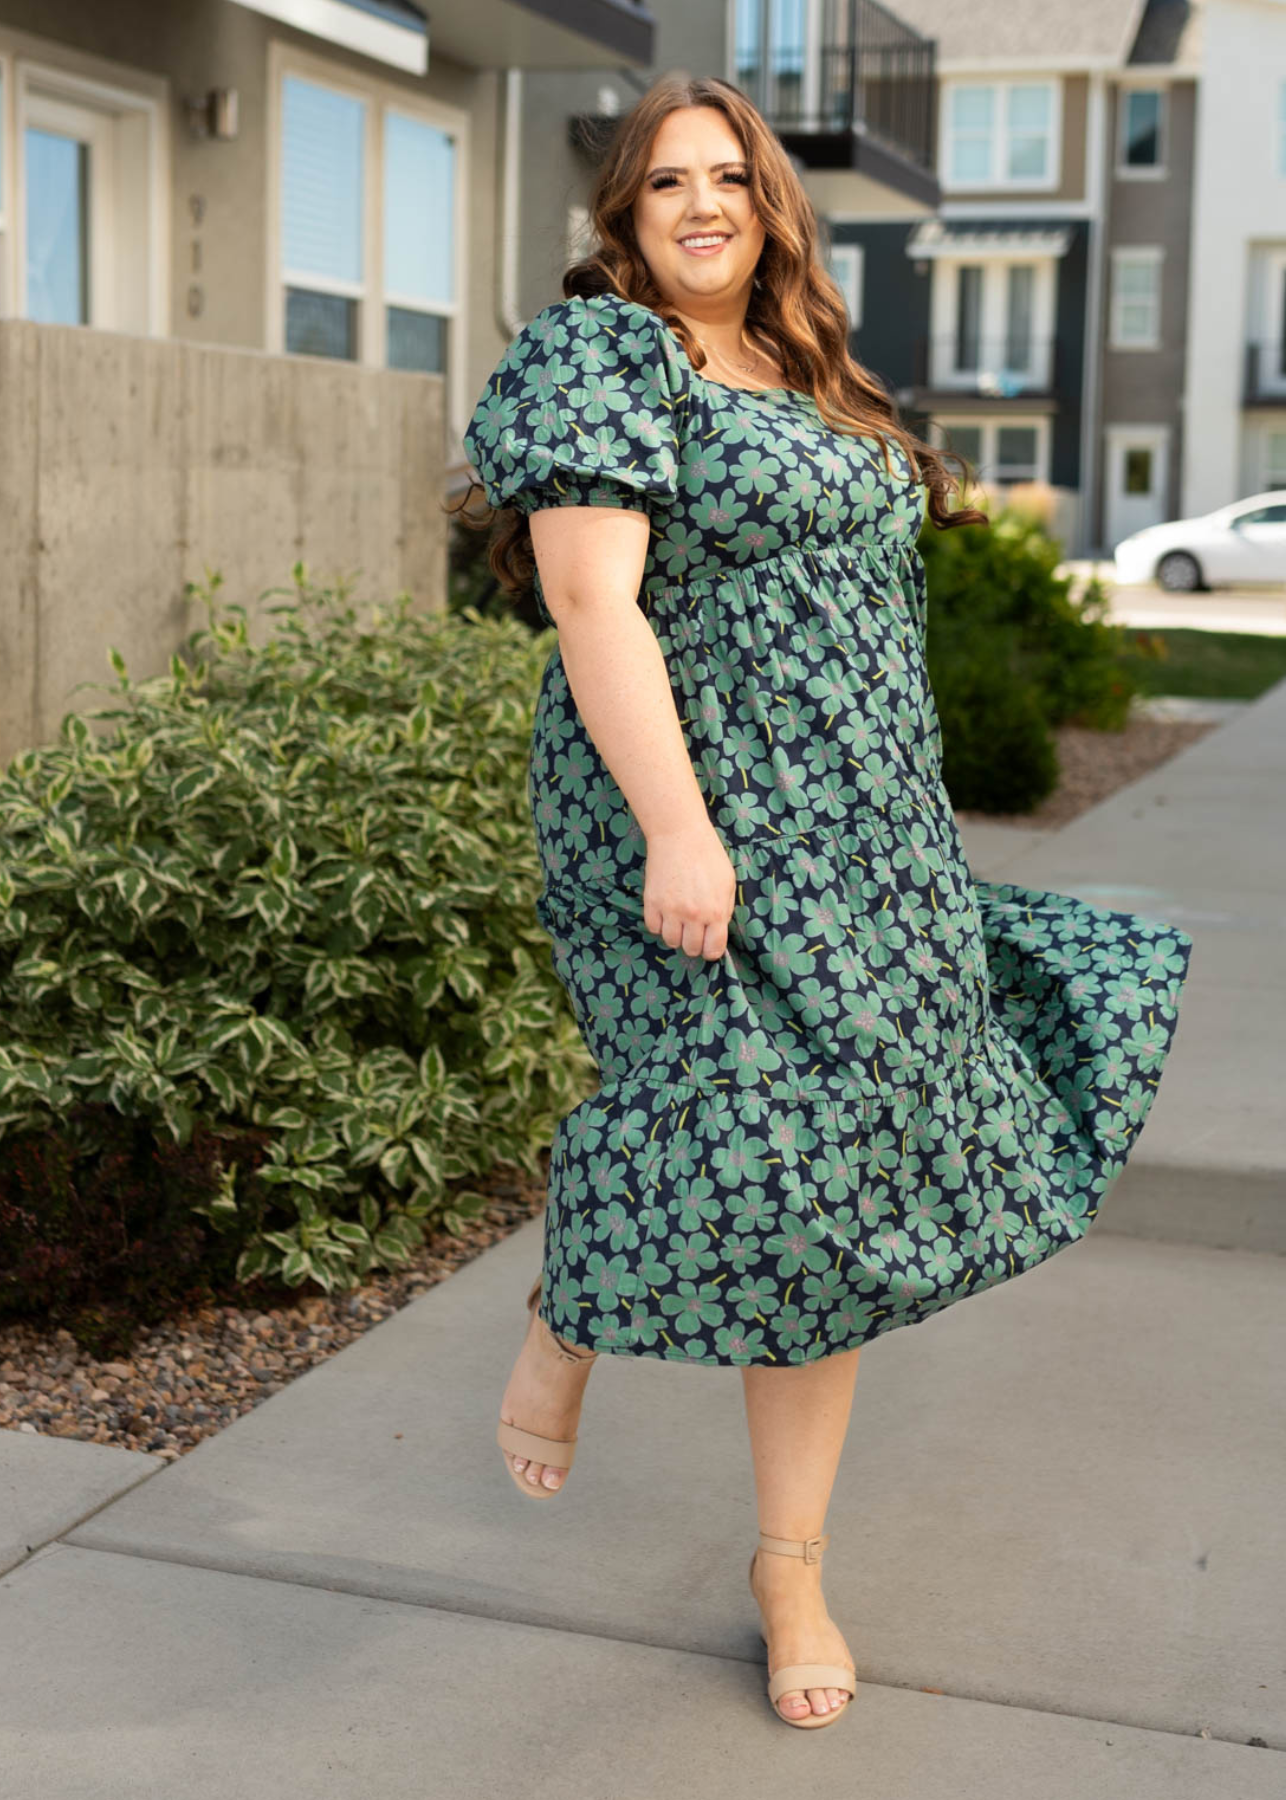 Plus size short sleeve dark green dress with floral print